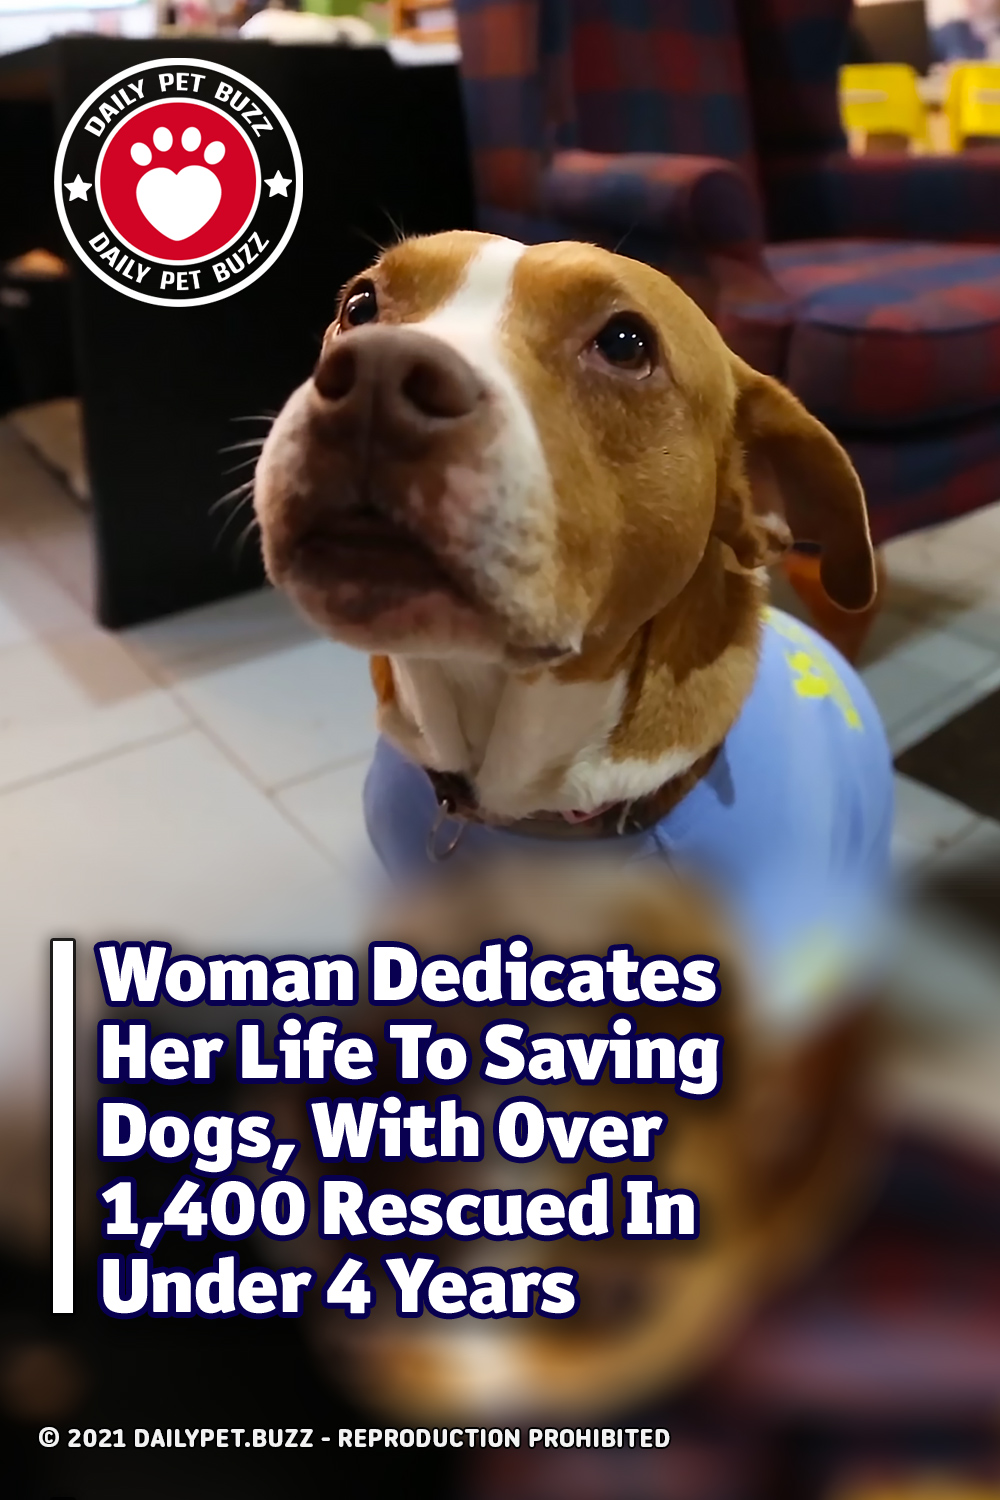 Woman Dedicates Her Life To Saving Dogs, With Over 1,400 Rescued In Under 4 Years